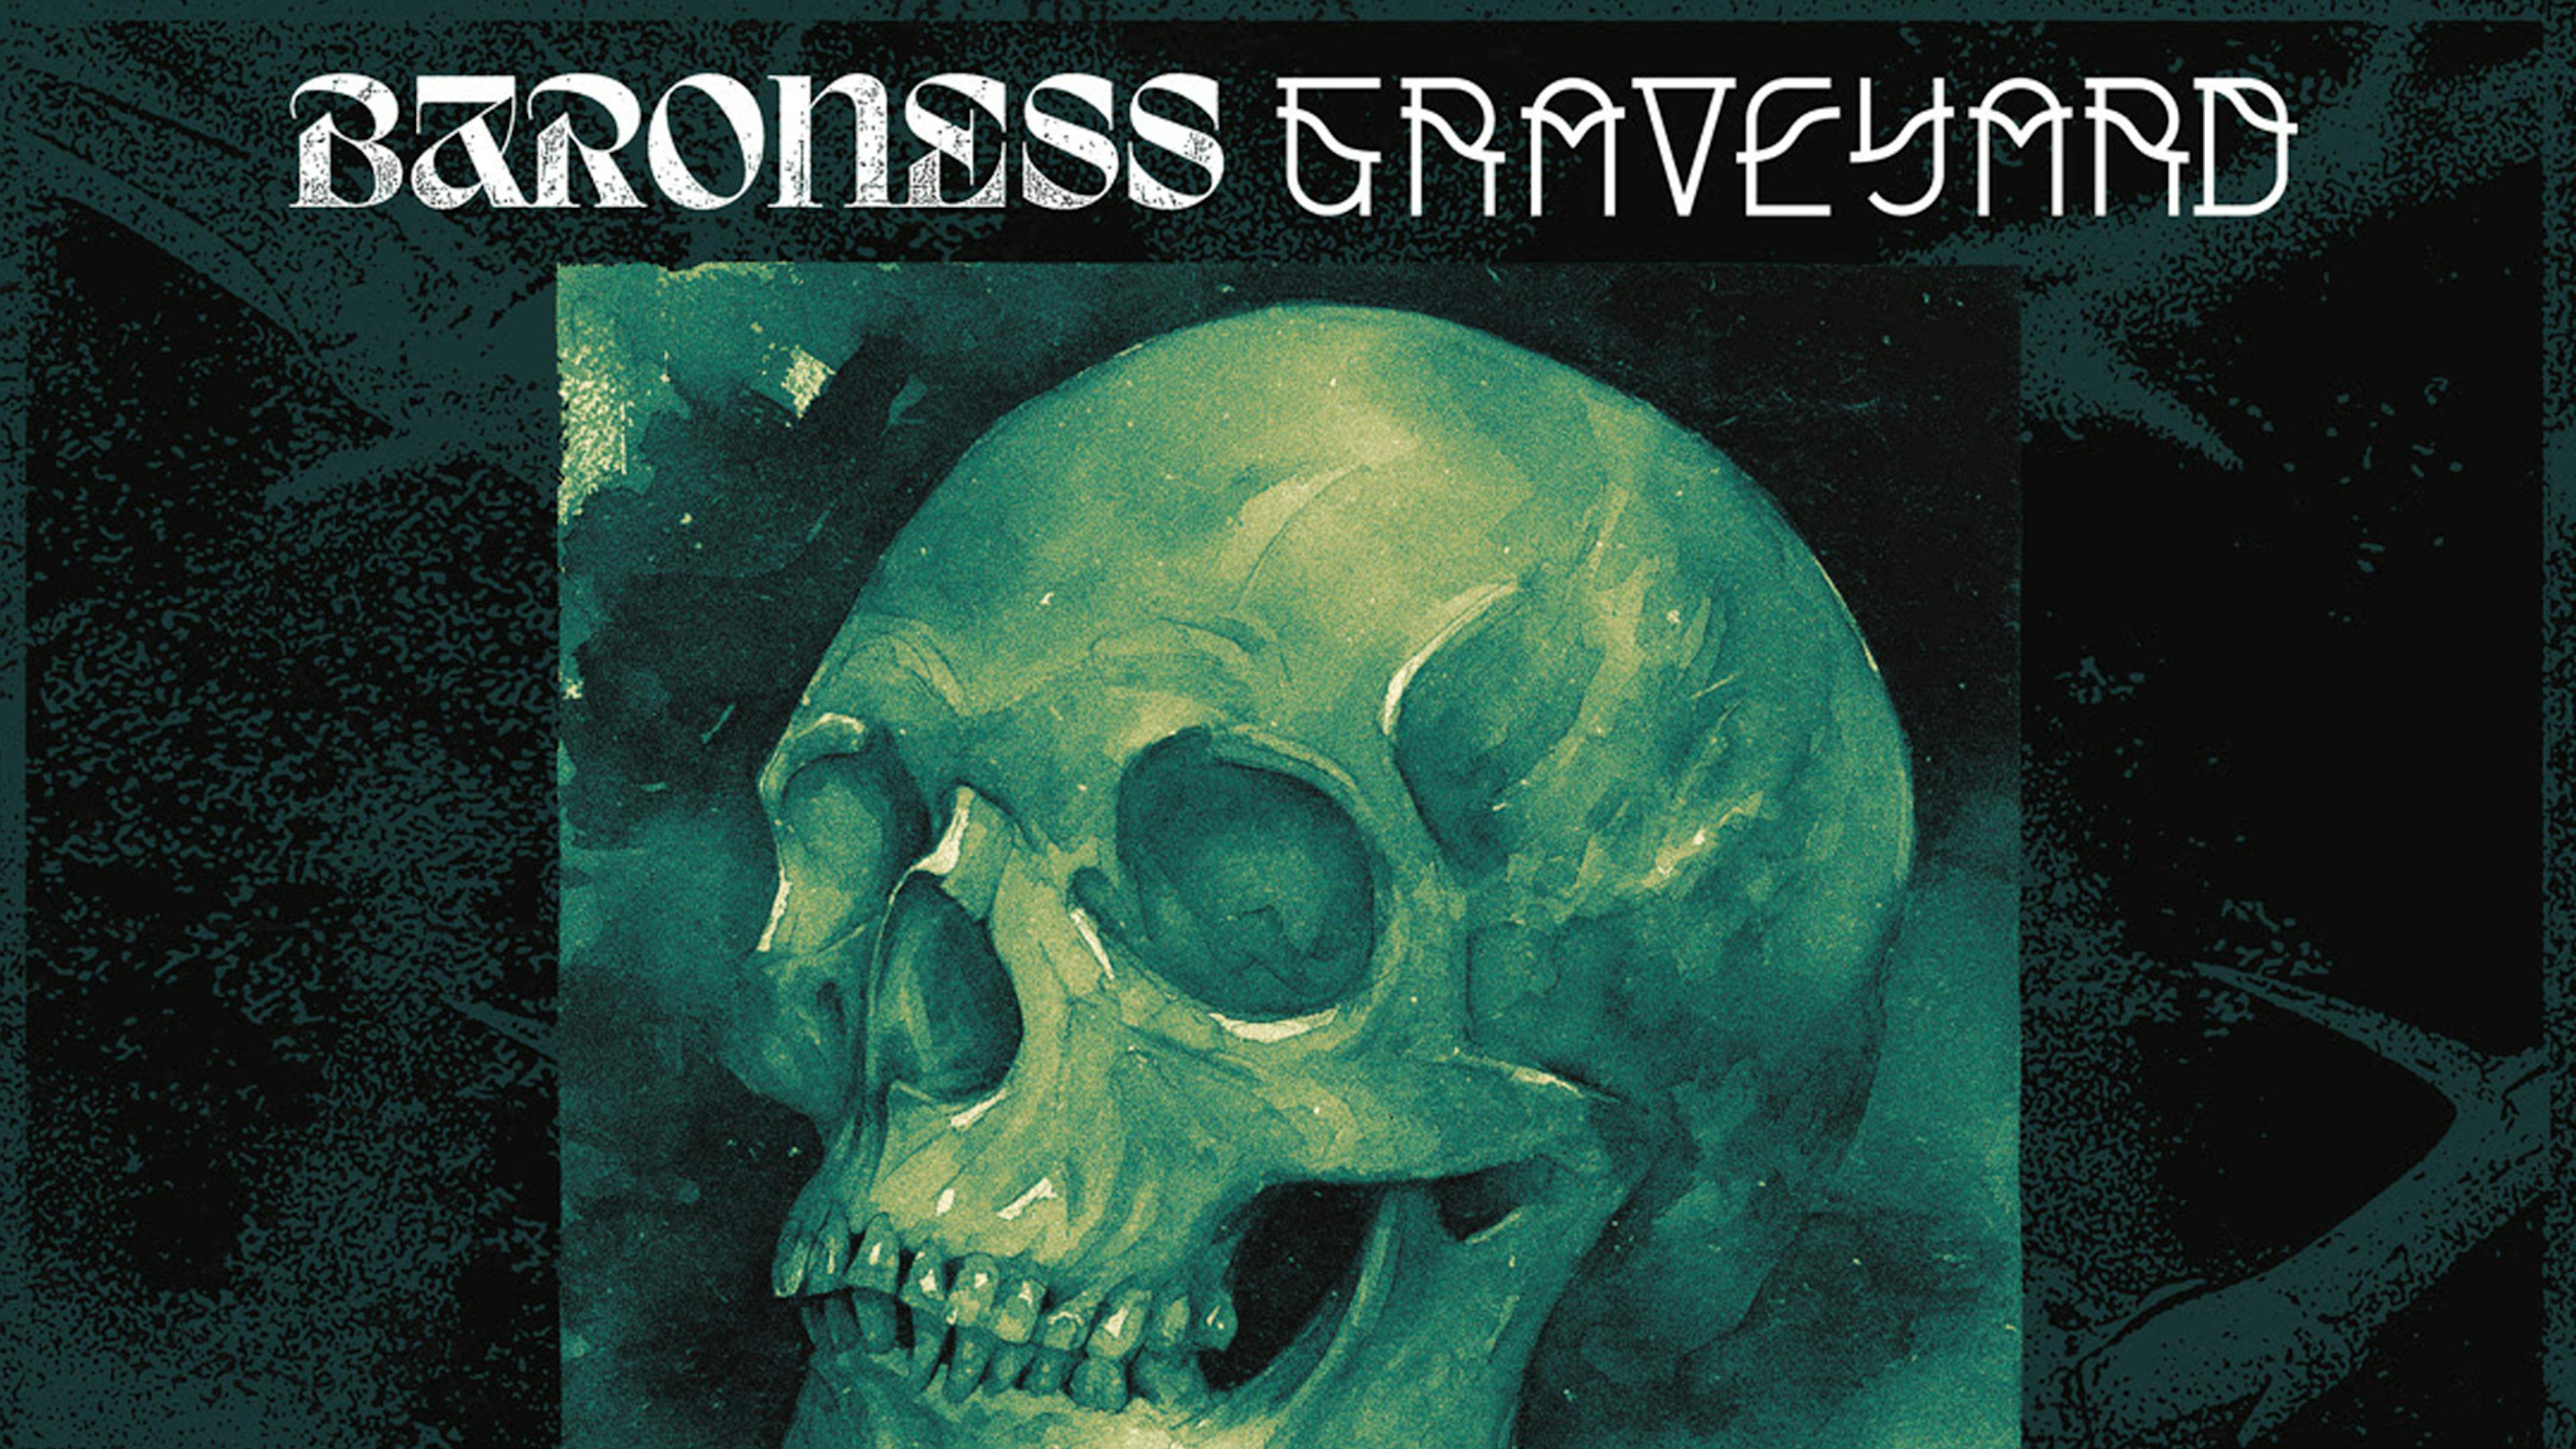 Baroness and Graveyard reveal UK and European co-headline tour